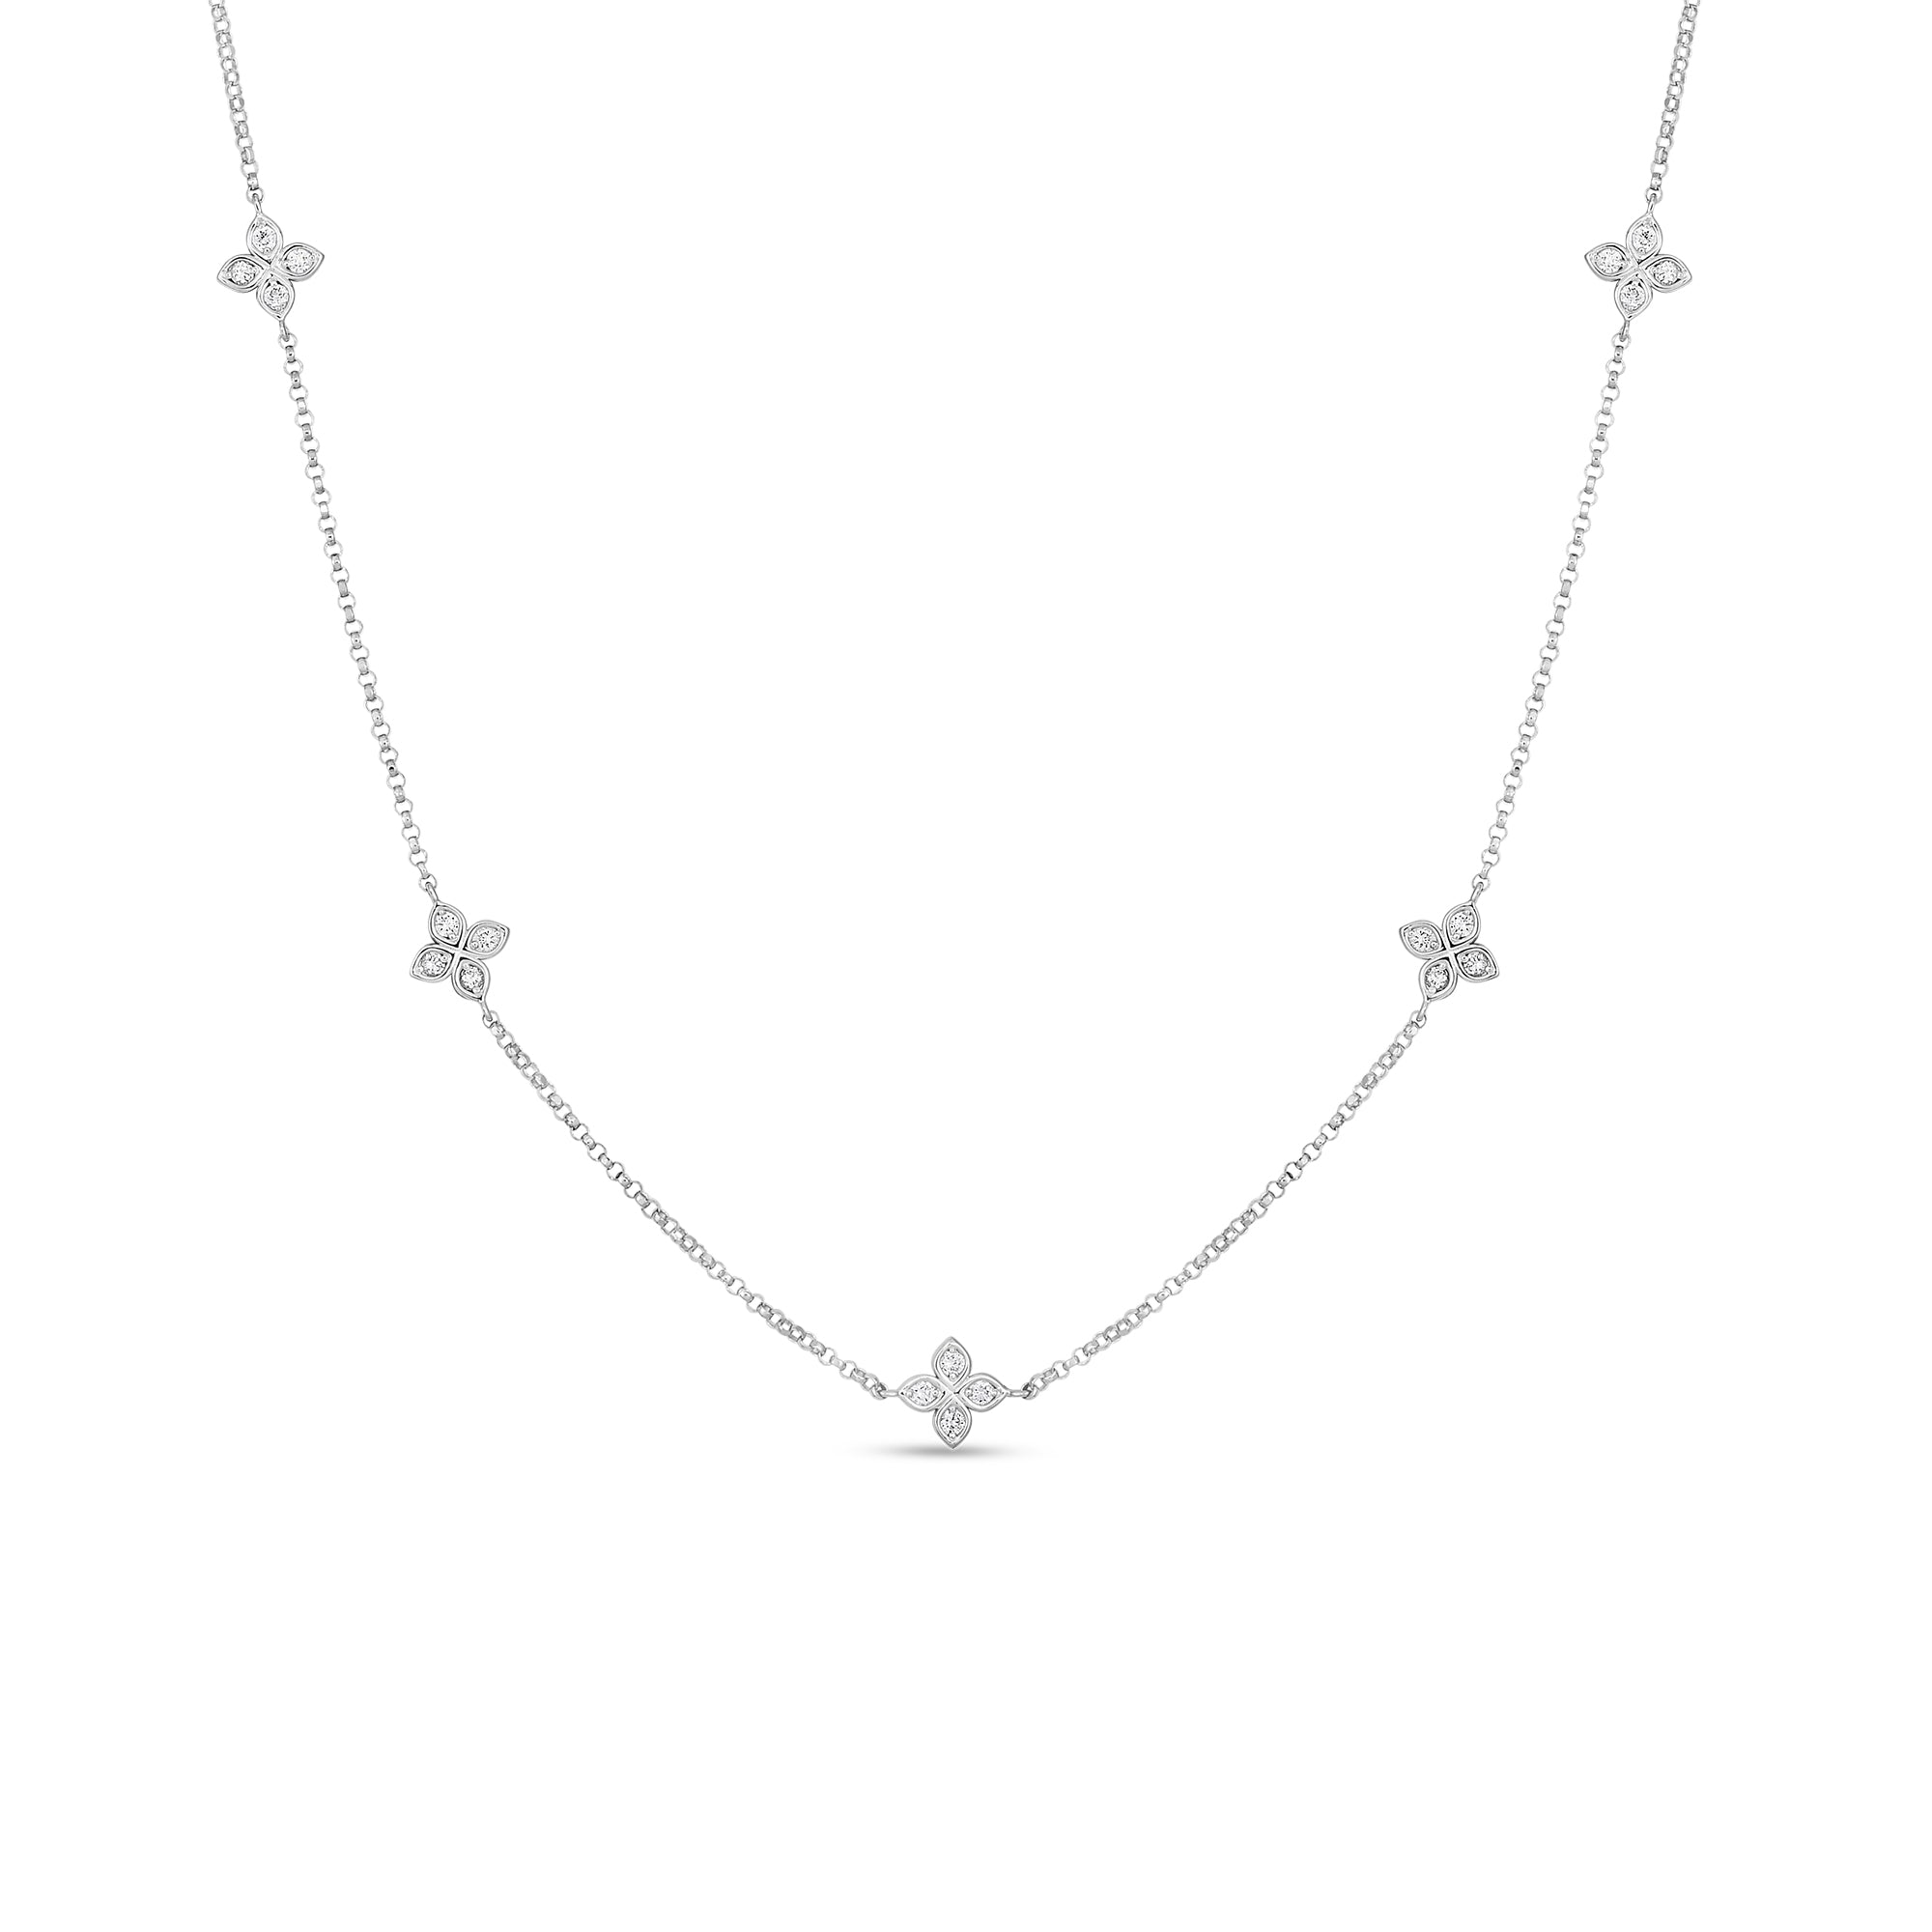 18K WHITE GOLD LOVE BY THE INCH 5 STATION FLOWER NECKLACE